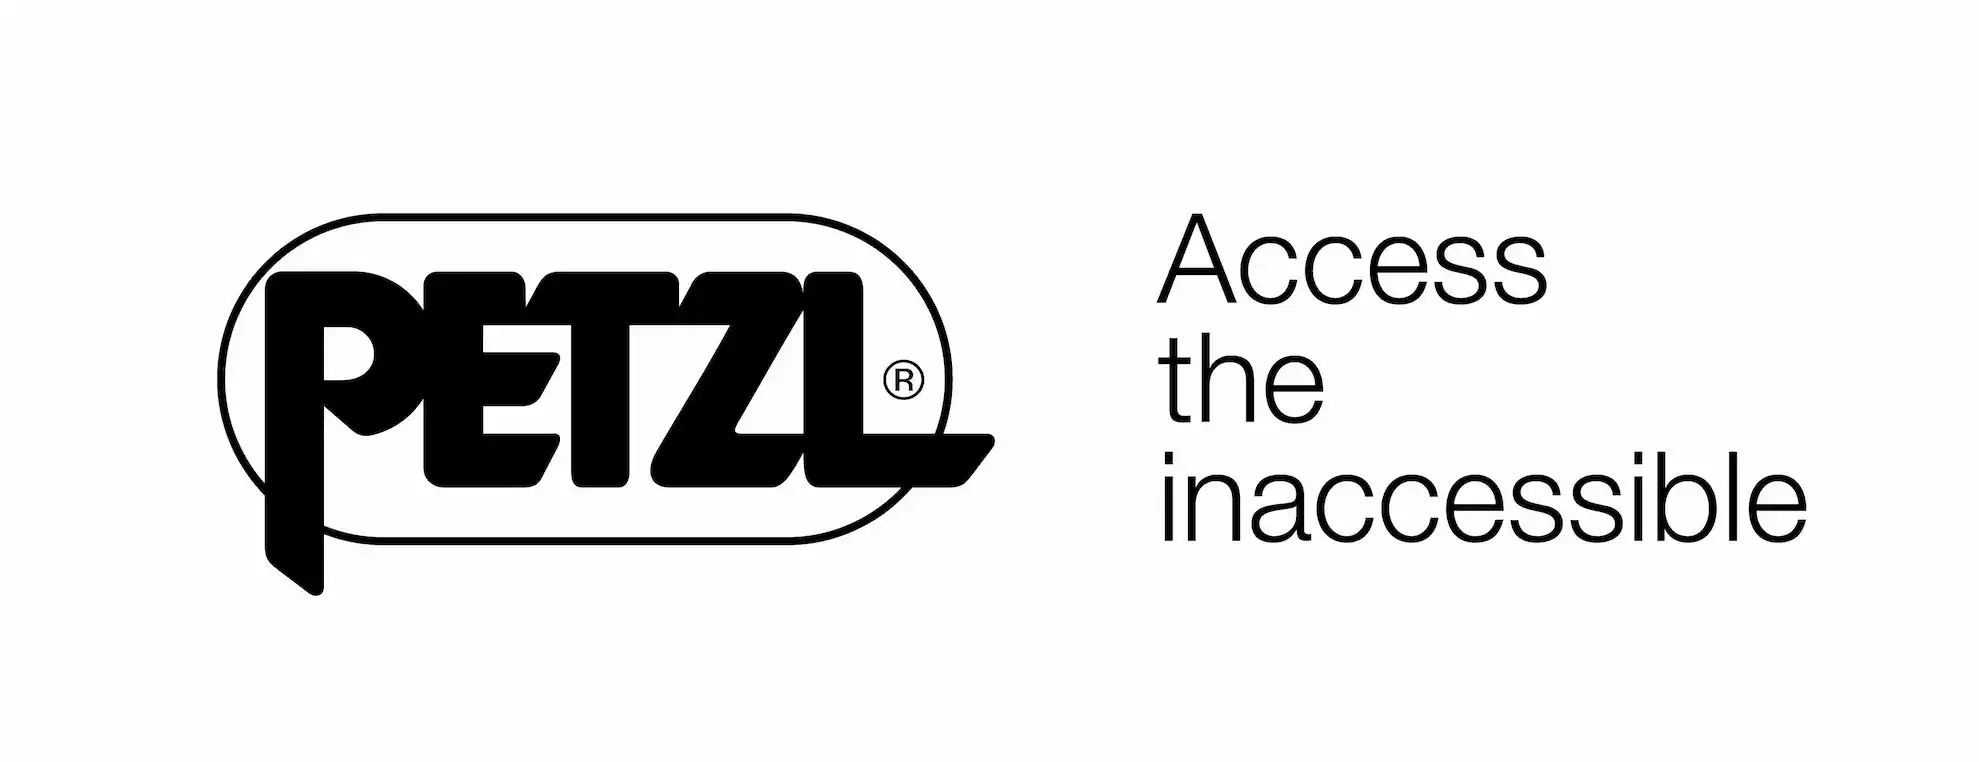 Logo PETZL: Access the inaccessible